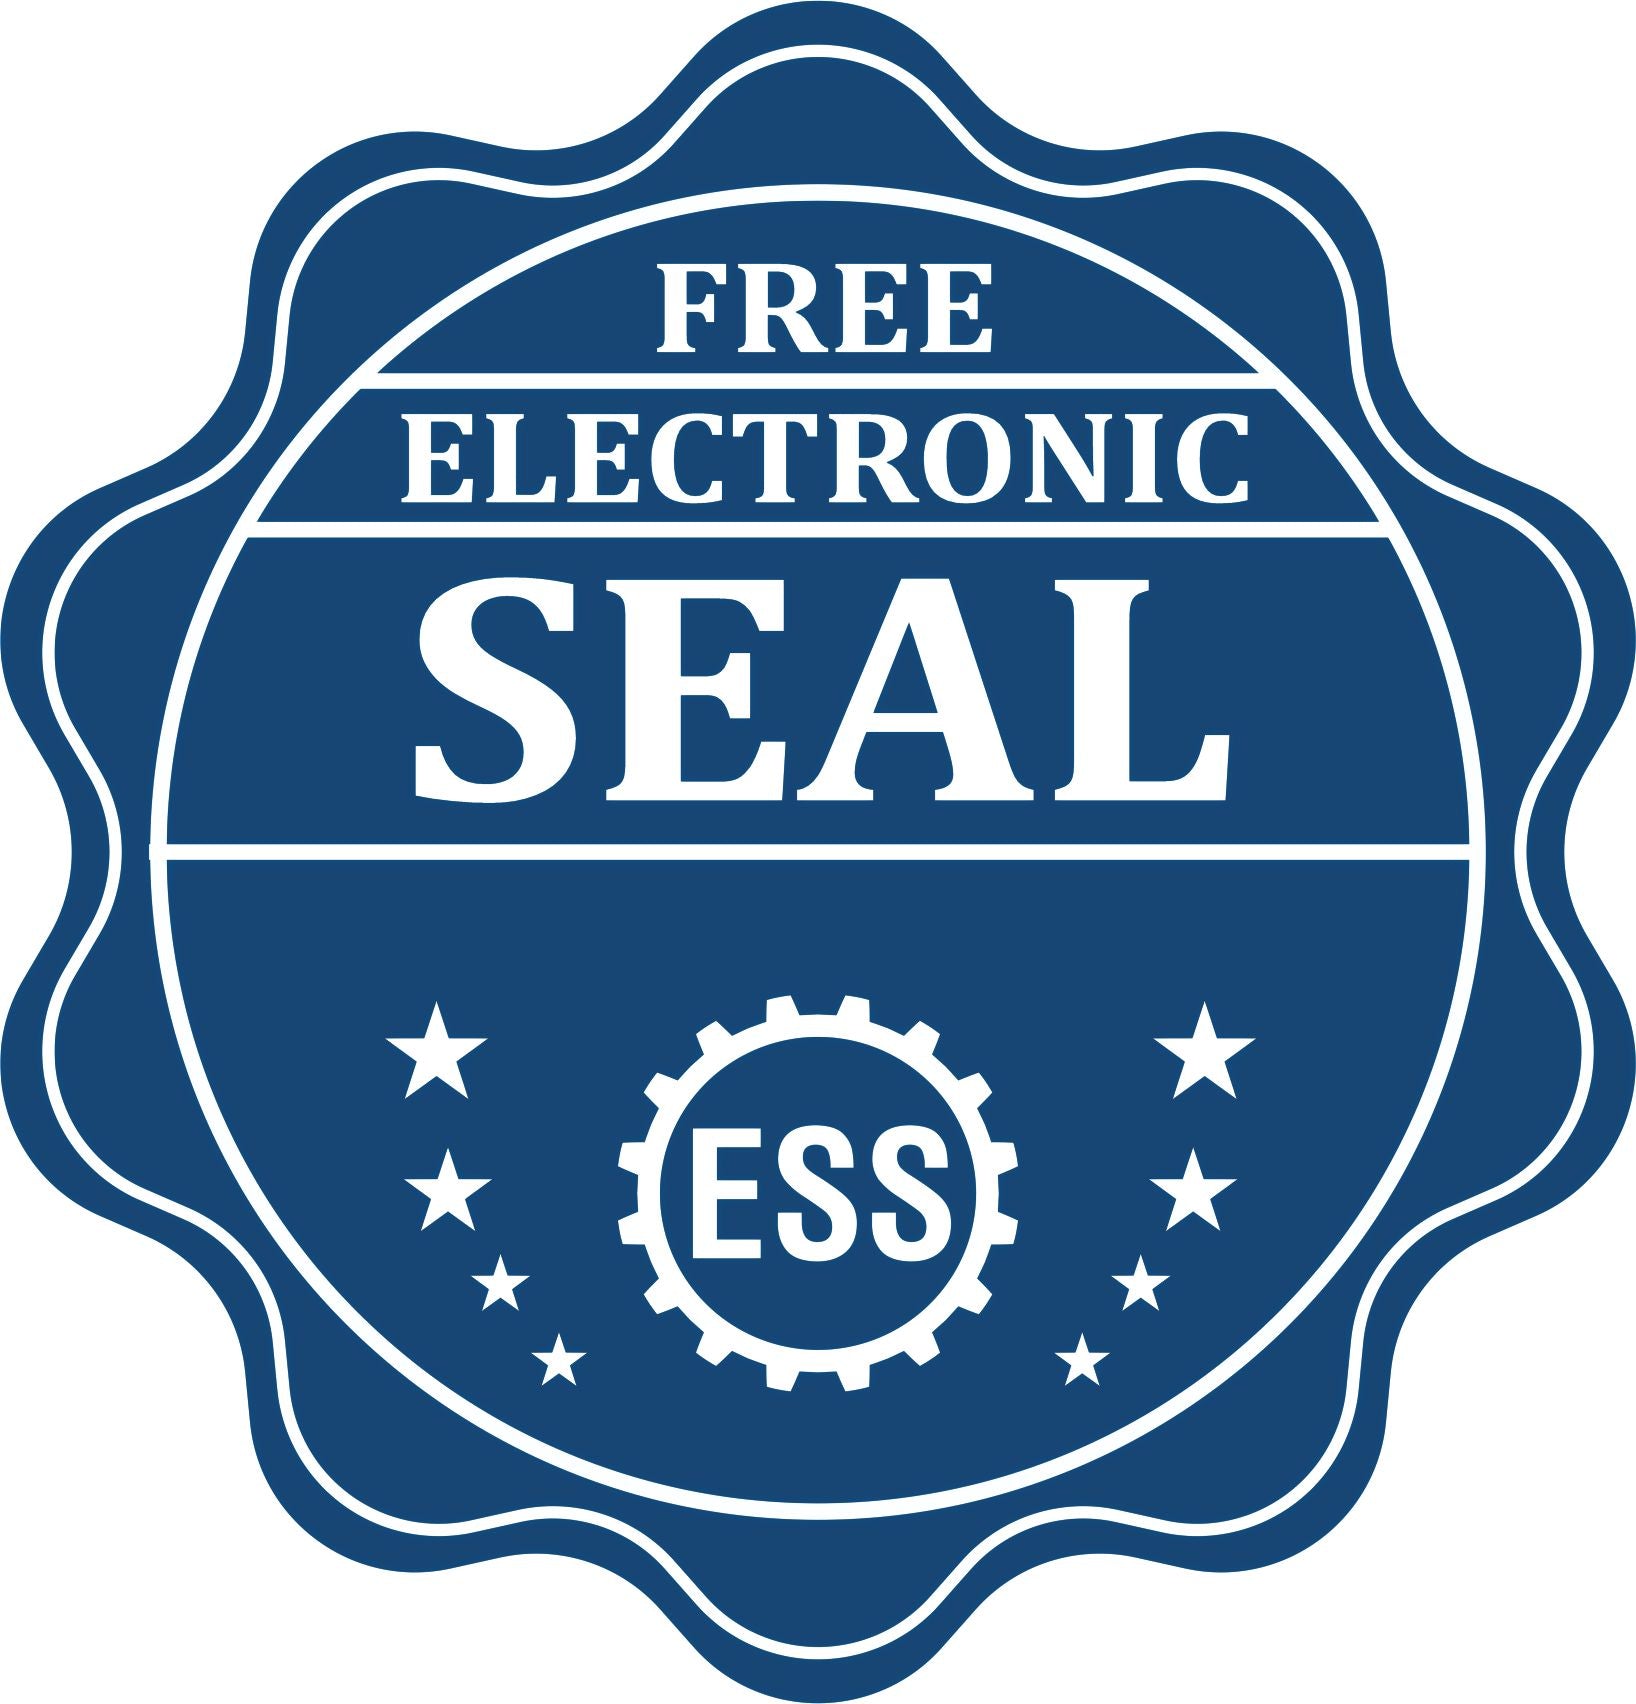 A badge showing a free electronic seal for the Long Reach North Carolina PE Seal with stars and the ESS gear on the emblem.